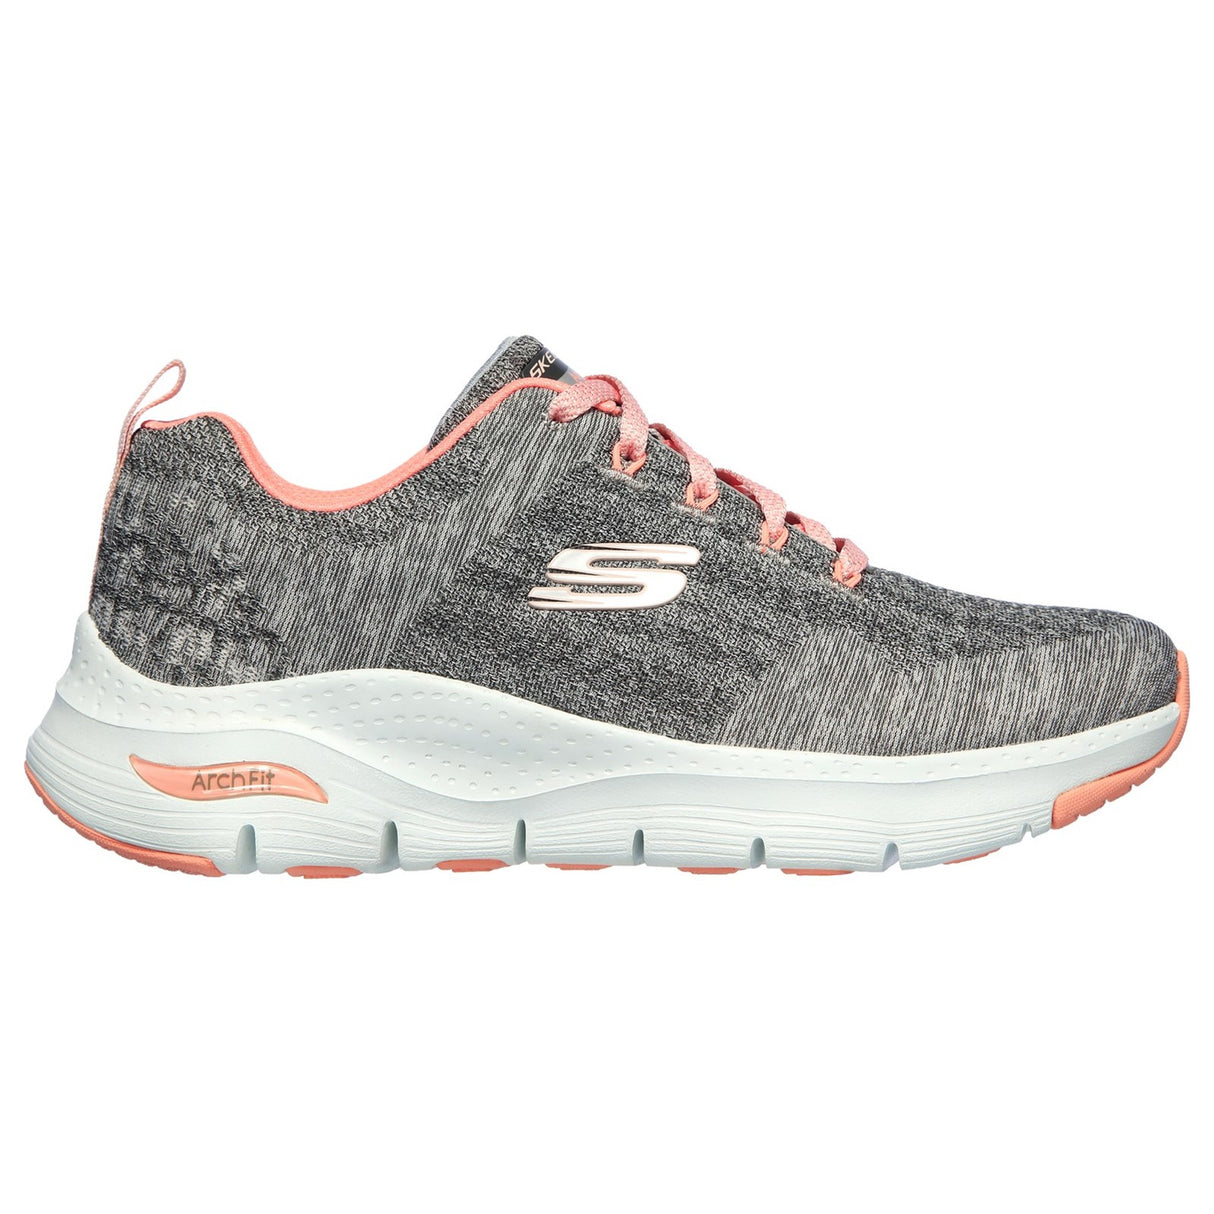 Skechers Arch Fit Comfy Wave Wide Sports Shoe